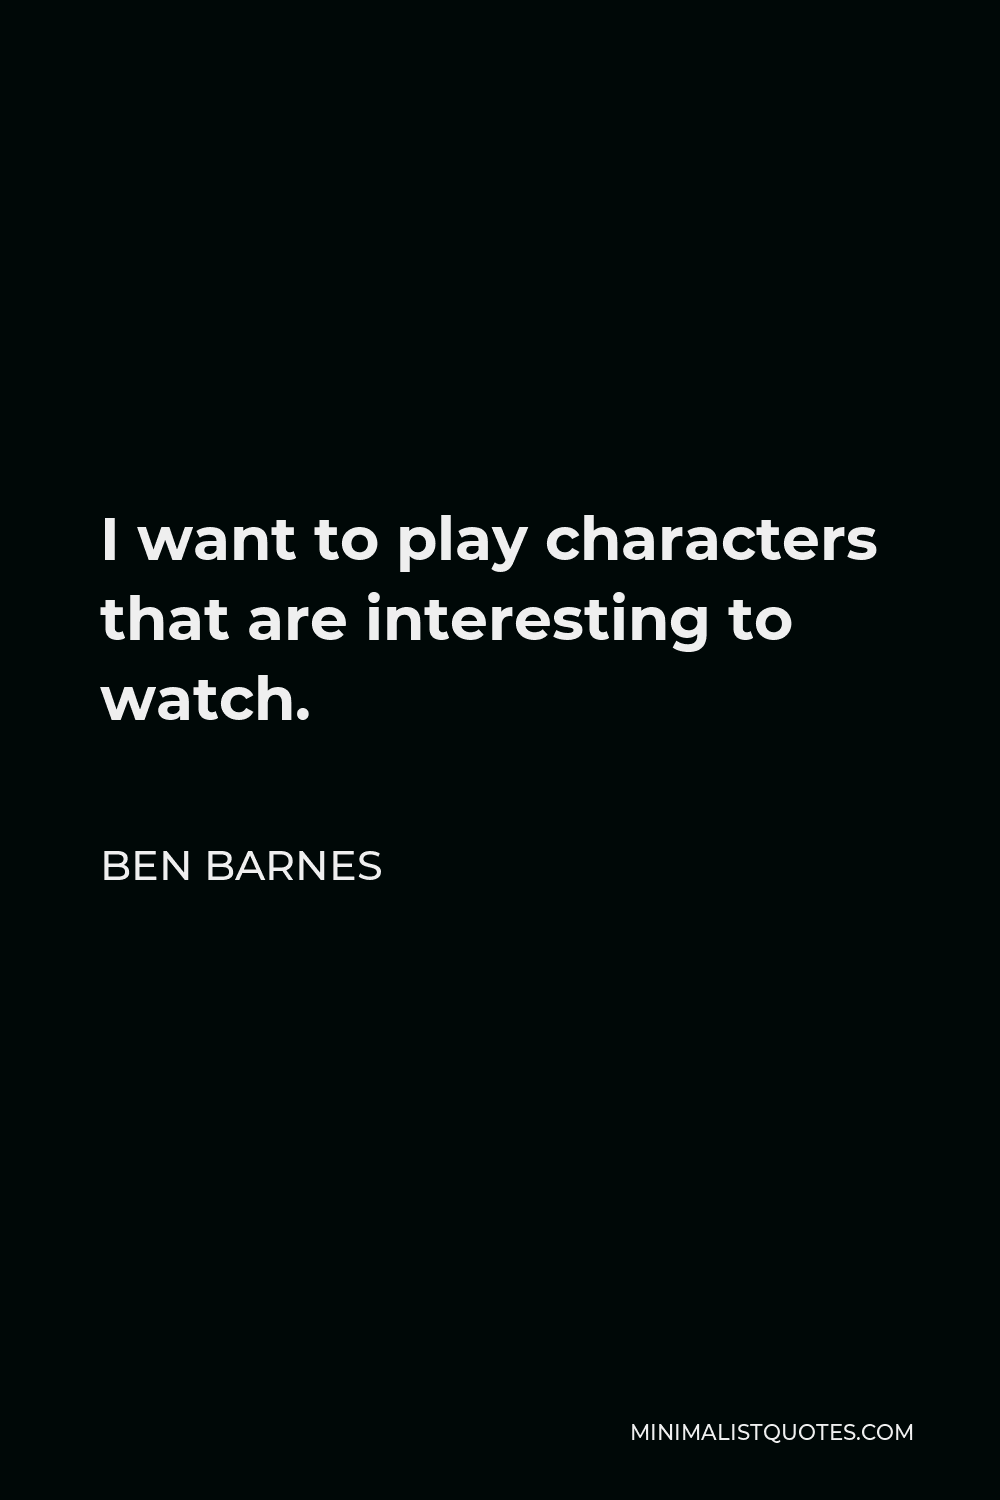 Ben Barnes Quote - I want to play characters that are interesting to watch.